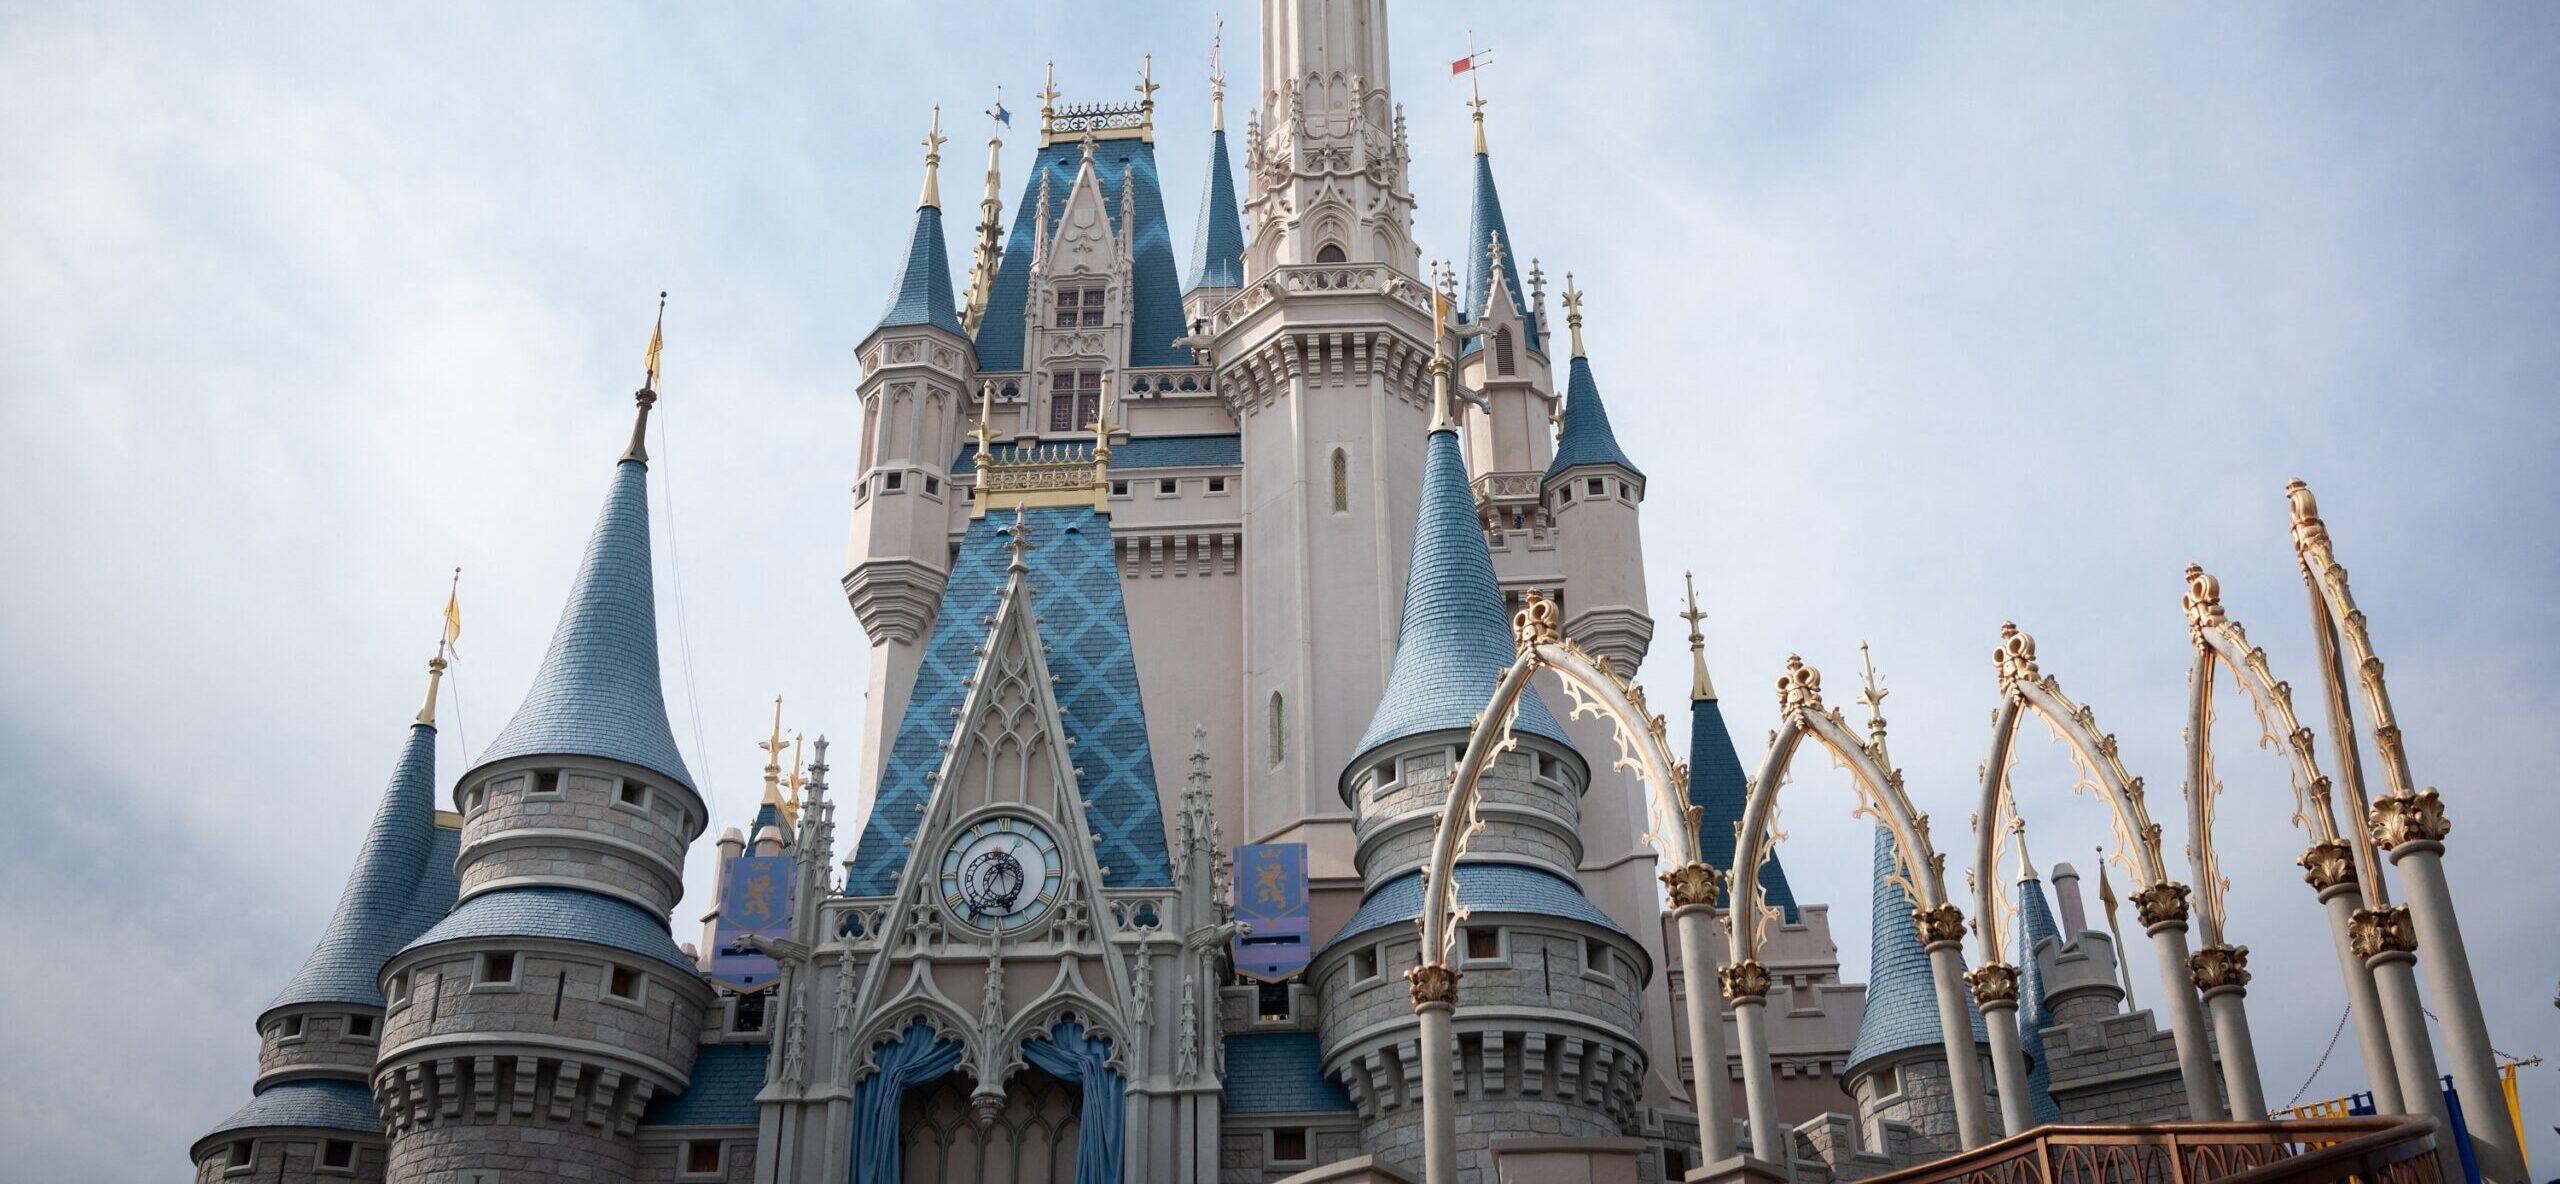 Mom Pays Insane Amount Of Money For ‘Cinderella Cereal’ At Disney World